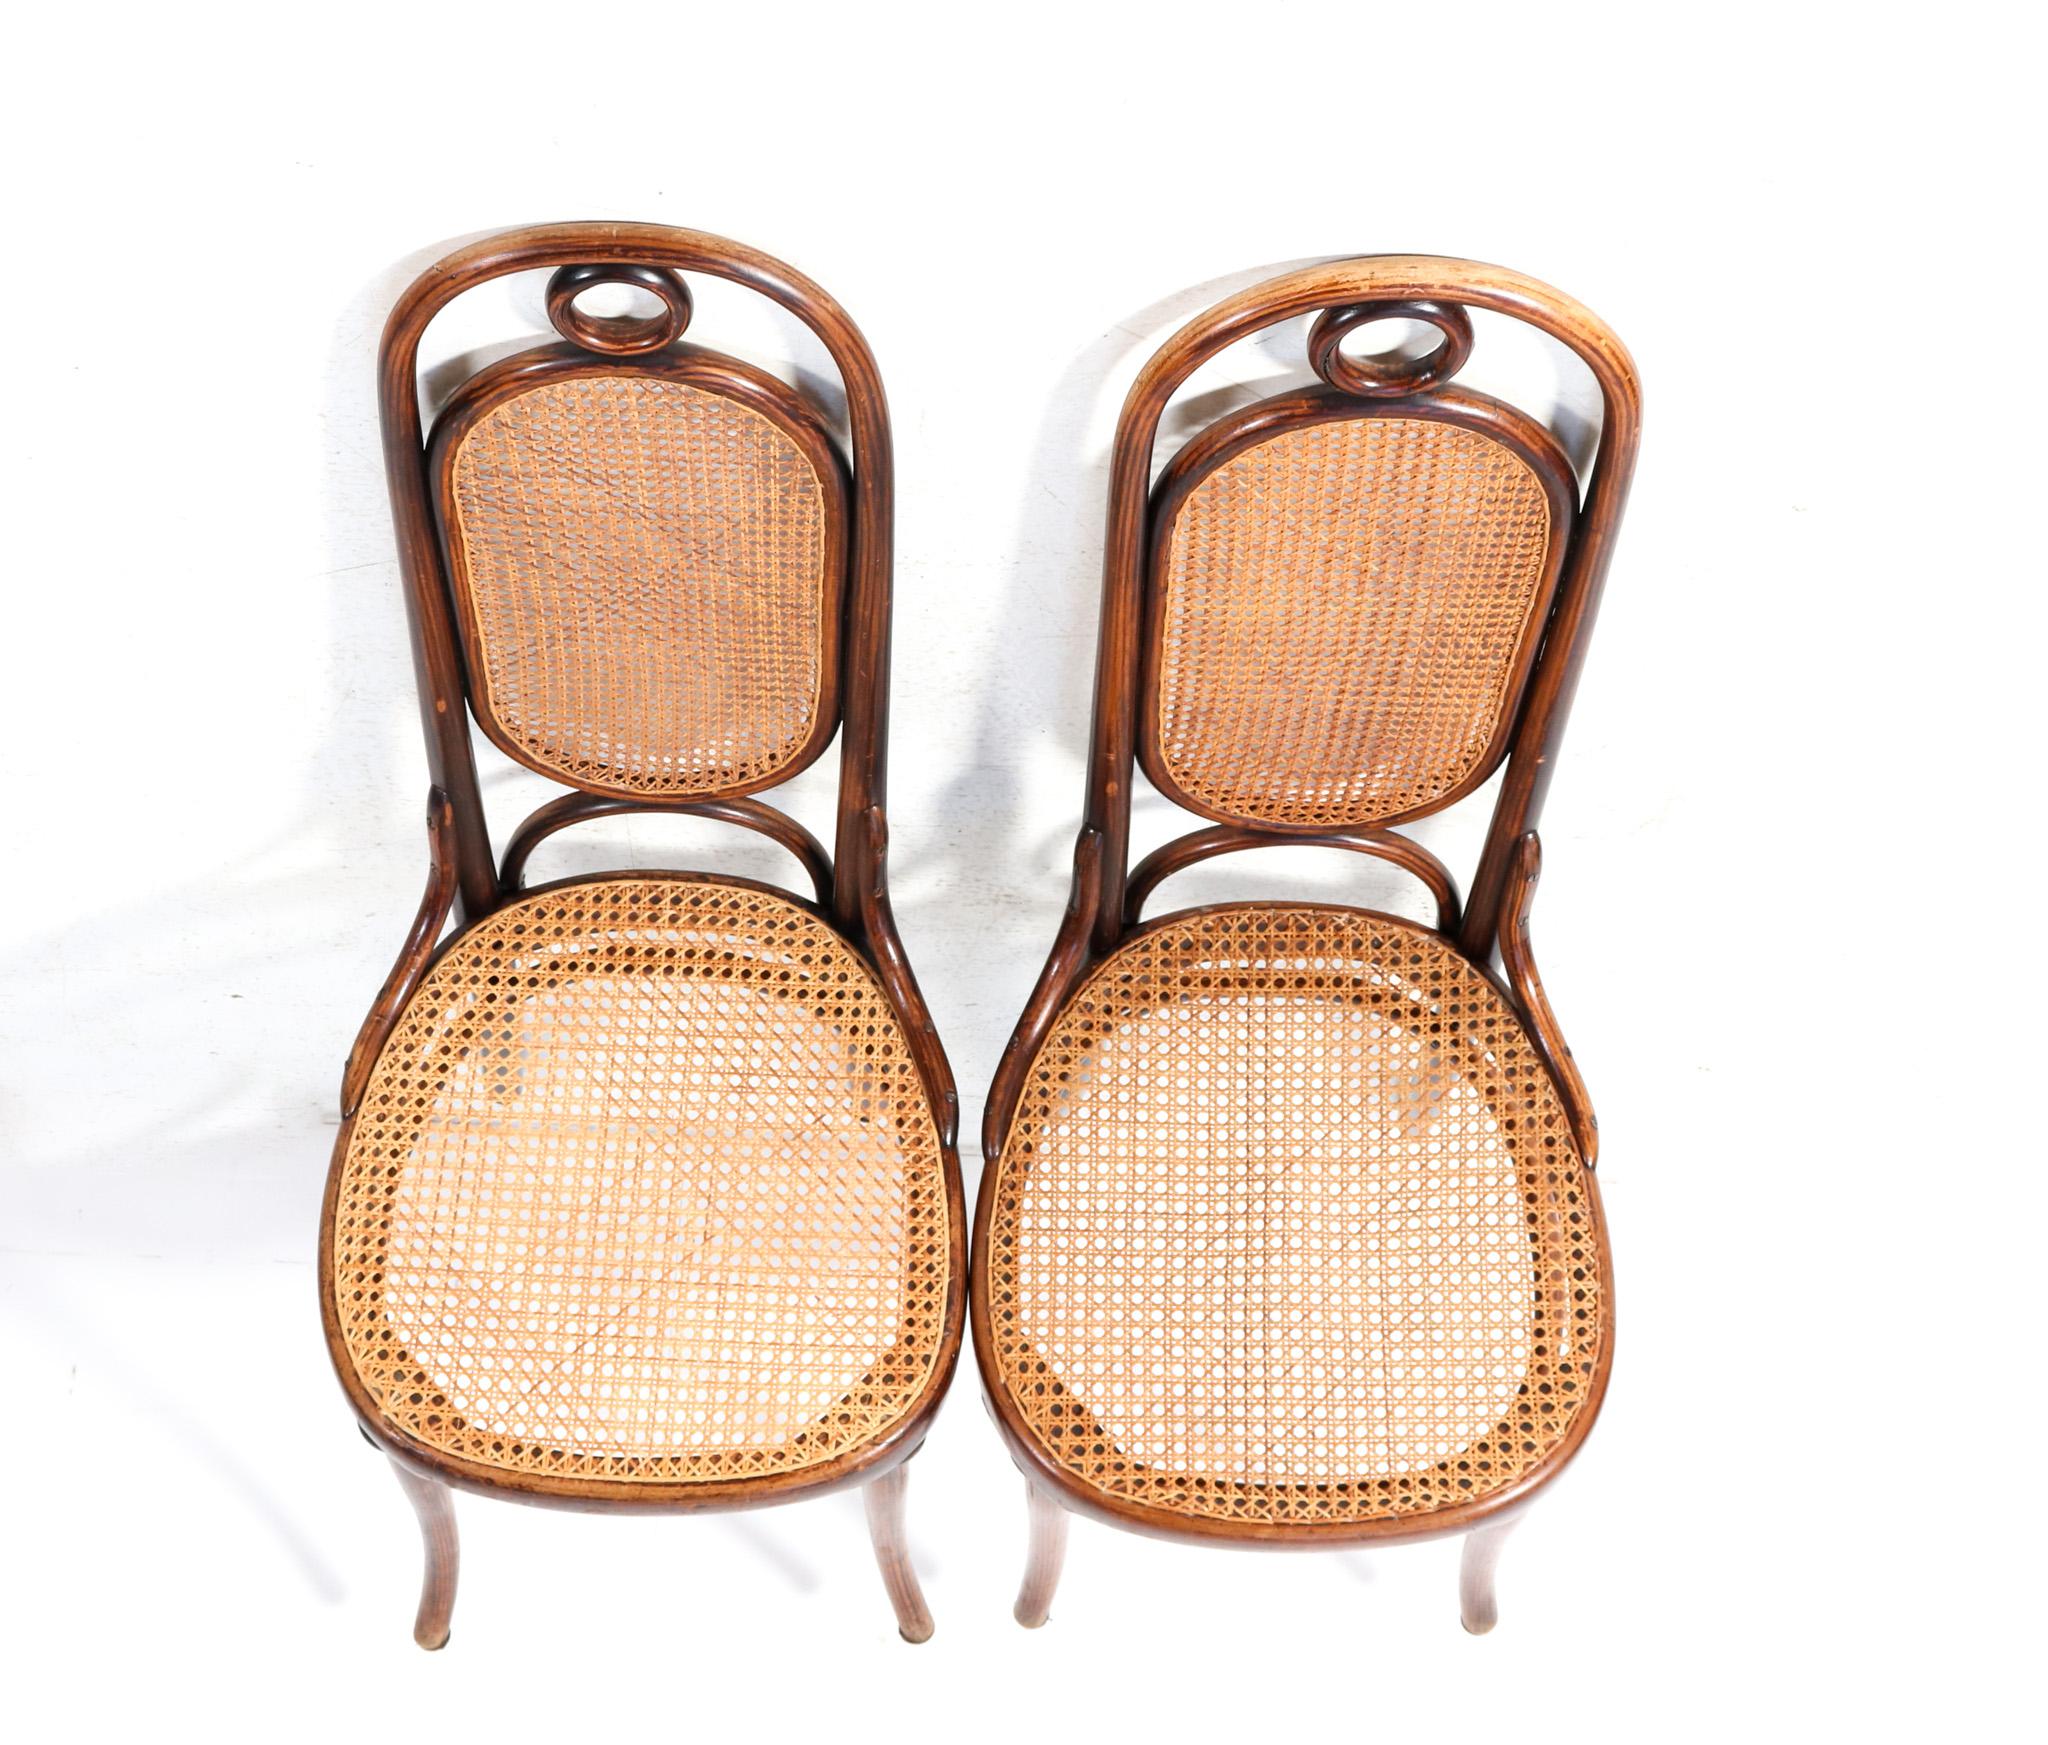 Pair of Beech Art Nouveau High Back Chairs Model 17 by Michael Thonet, 1890s For Sale 2